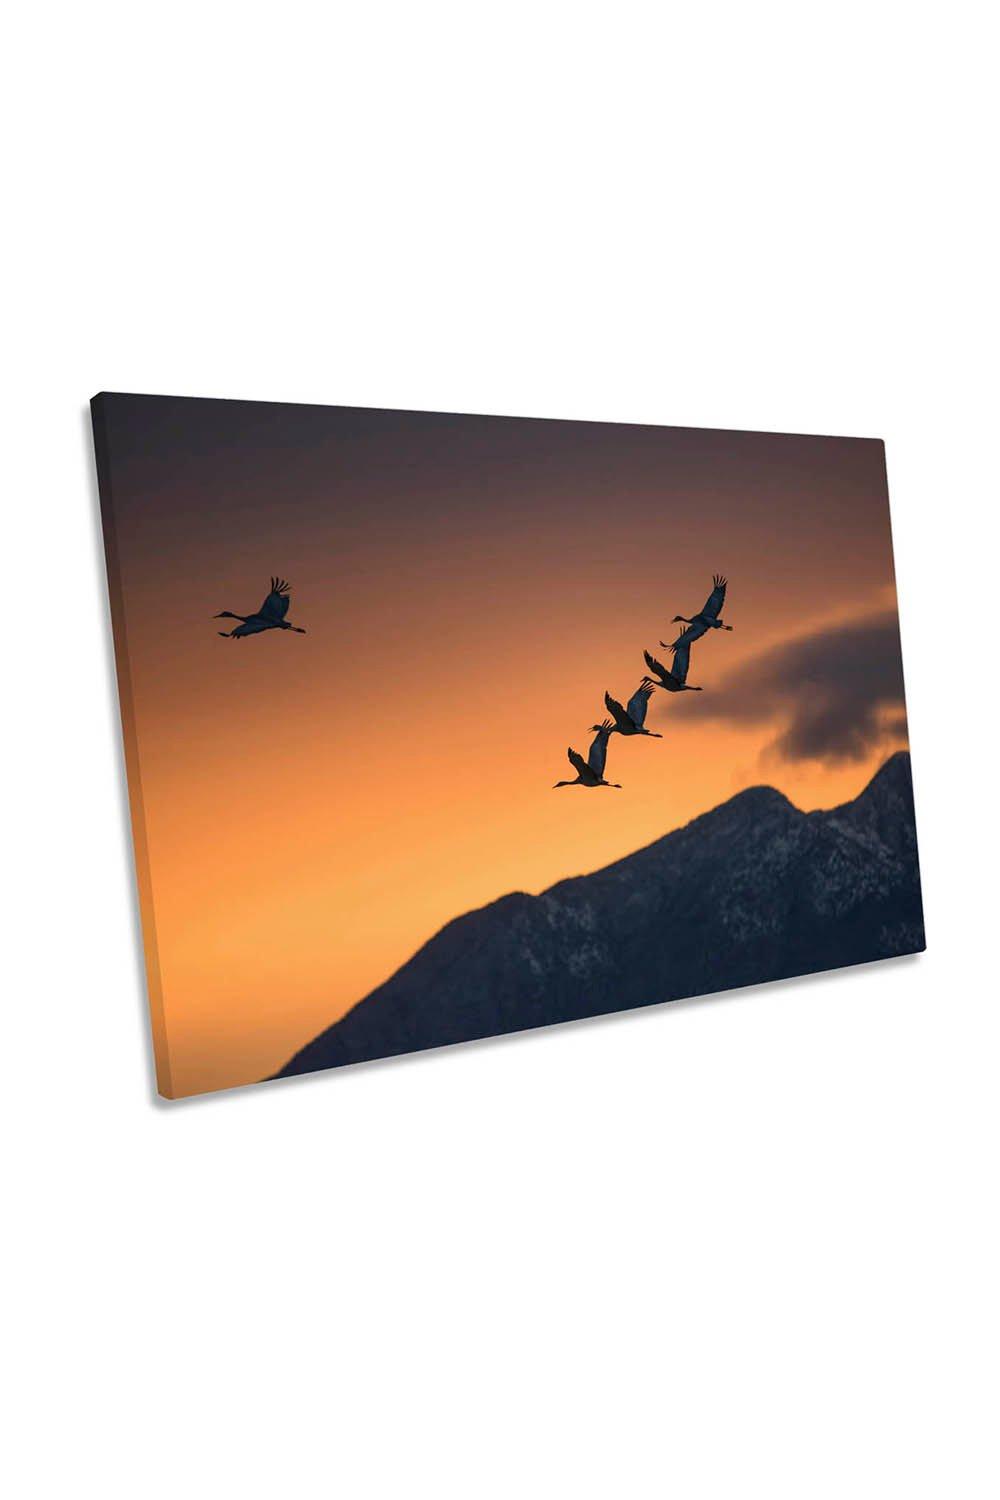 Above the Snowy Mountains Birds Orange Canvas Wall Art Picture Print